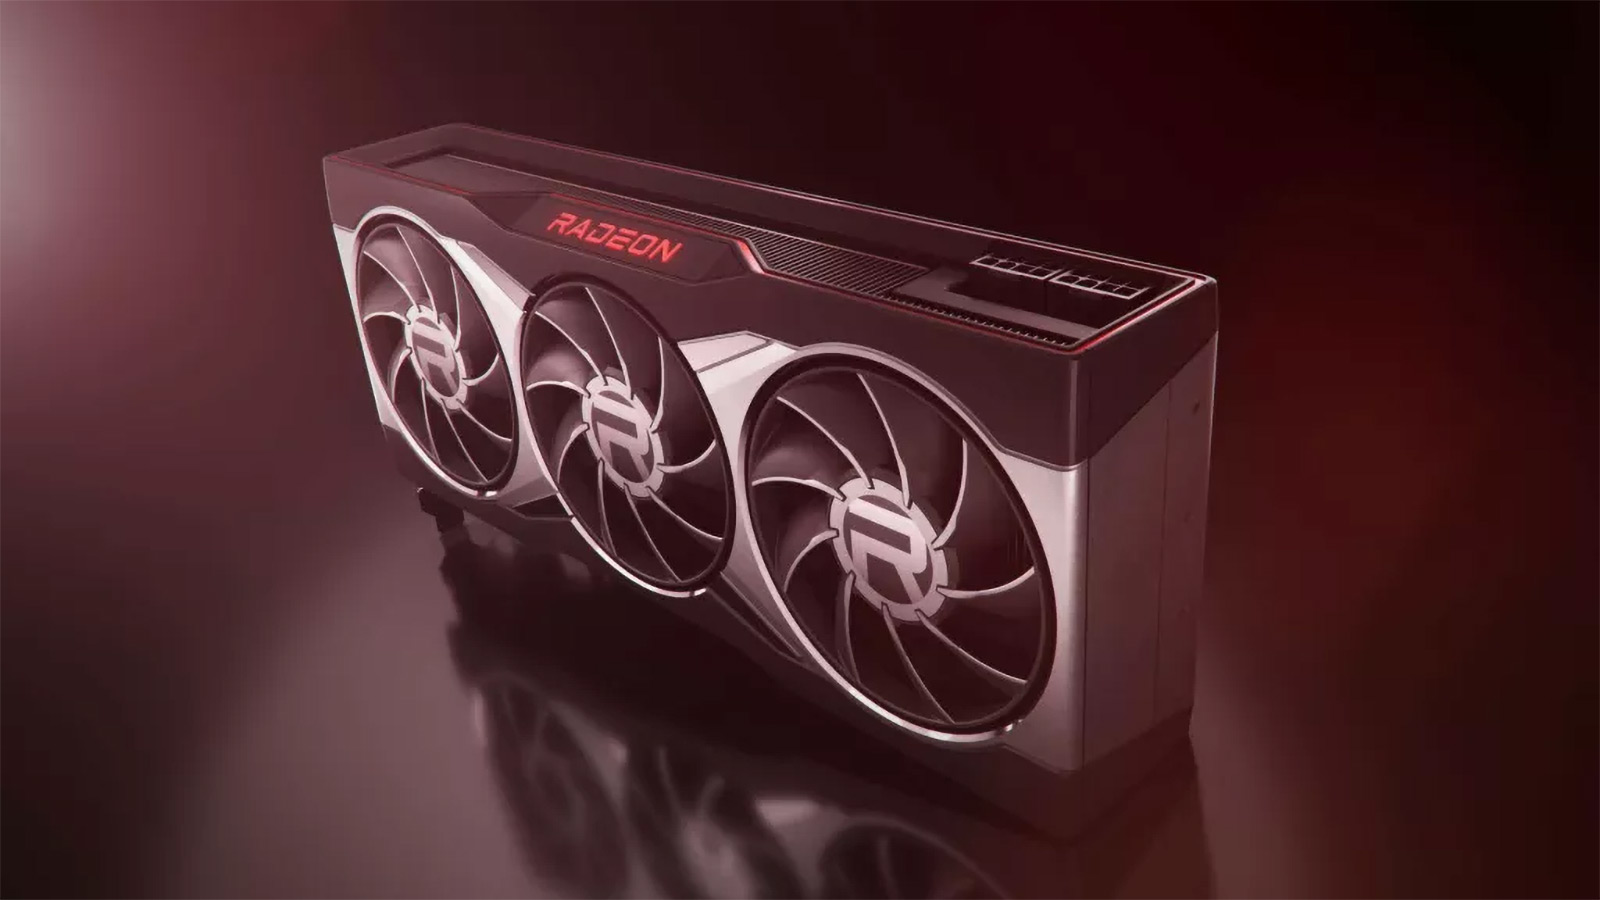 An AMD Radeon Graphics Card On Display Under A Red Light With Fog